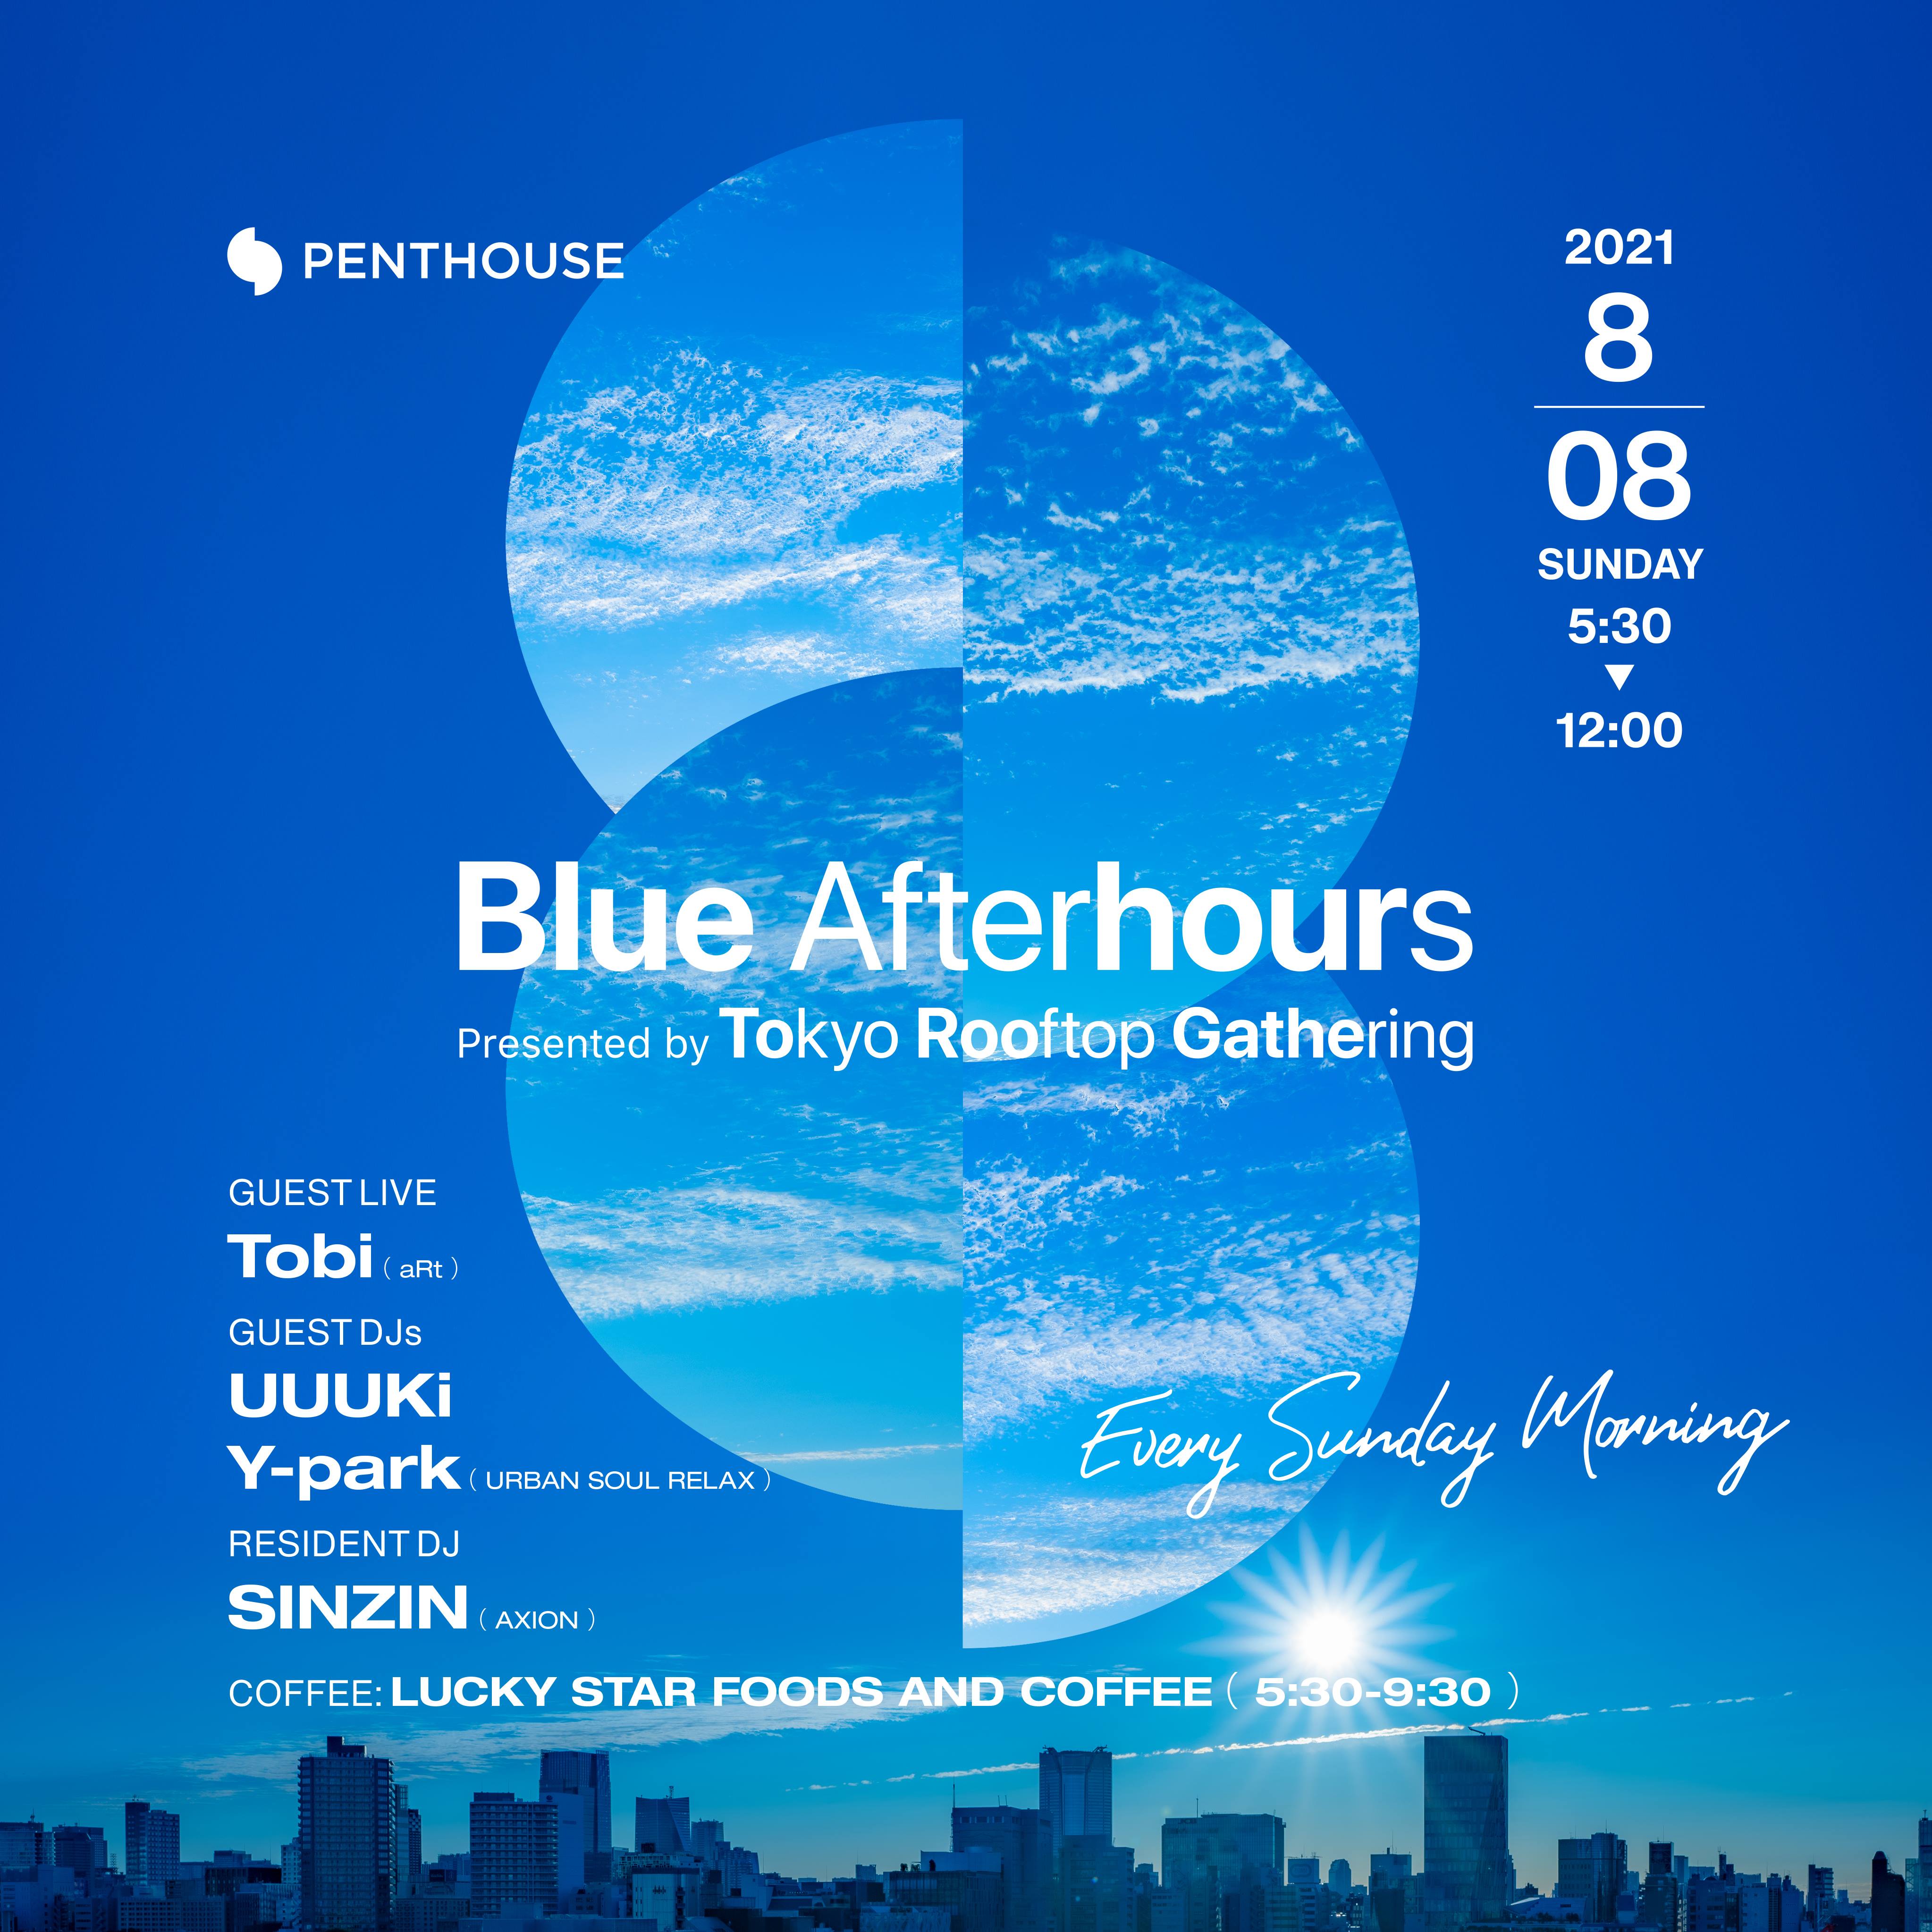 Blue Afterhours -Presented by Tokyo Rooftop Gathering-